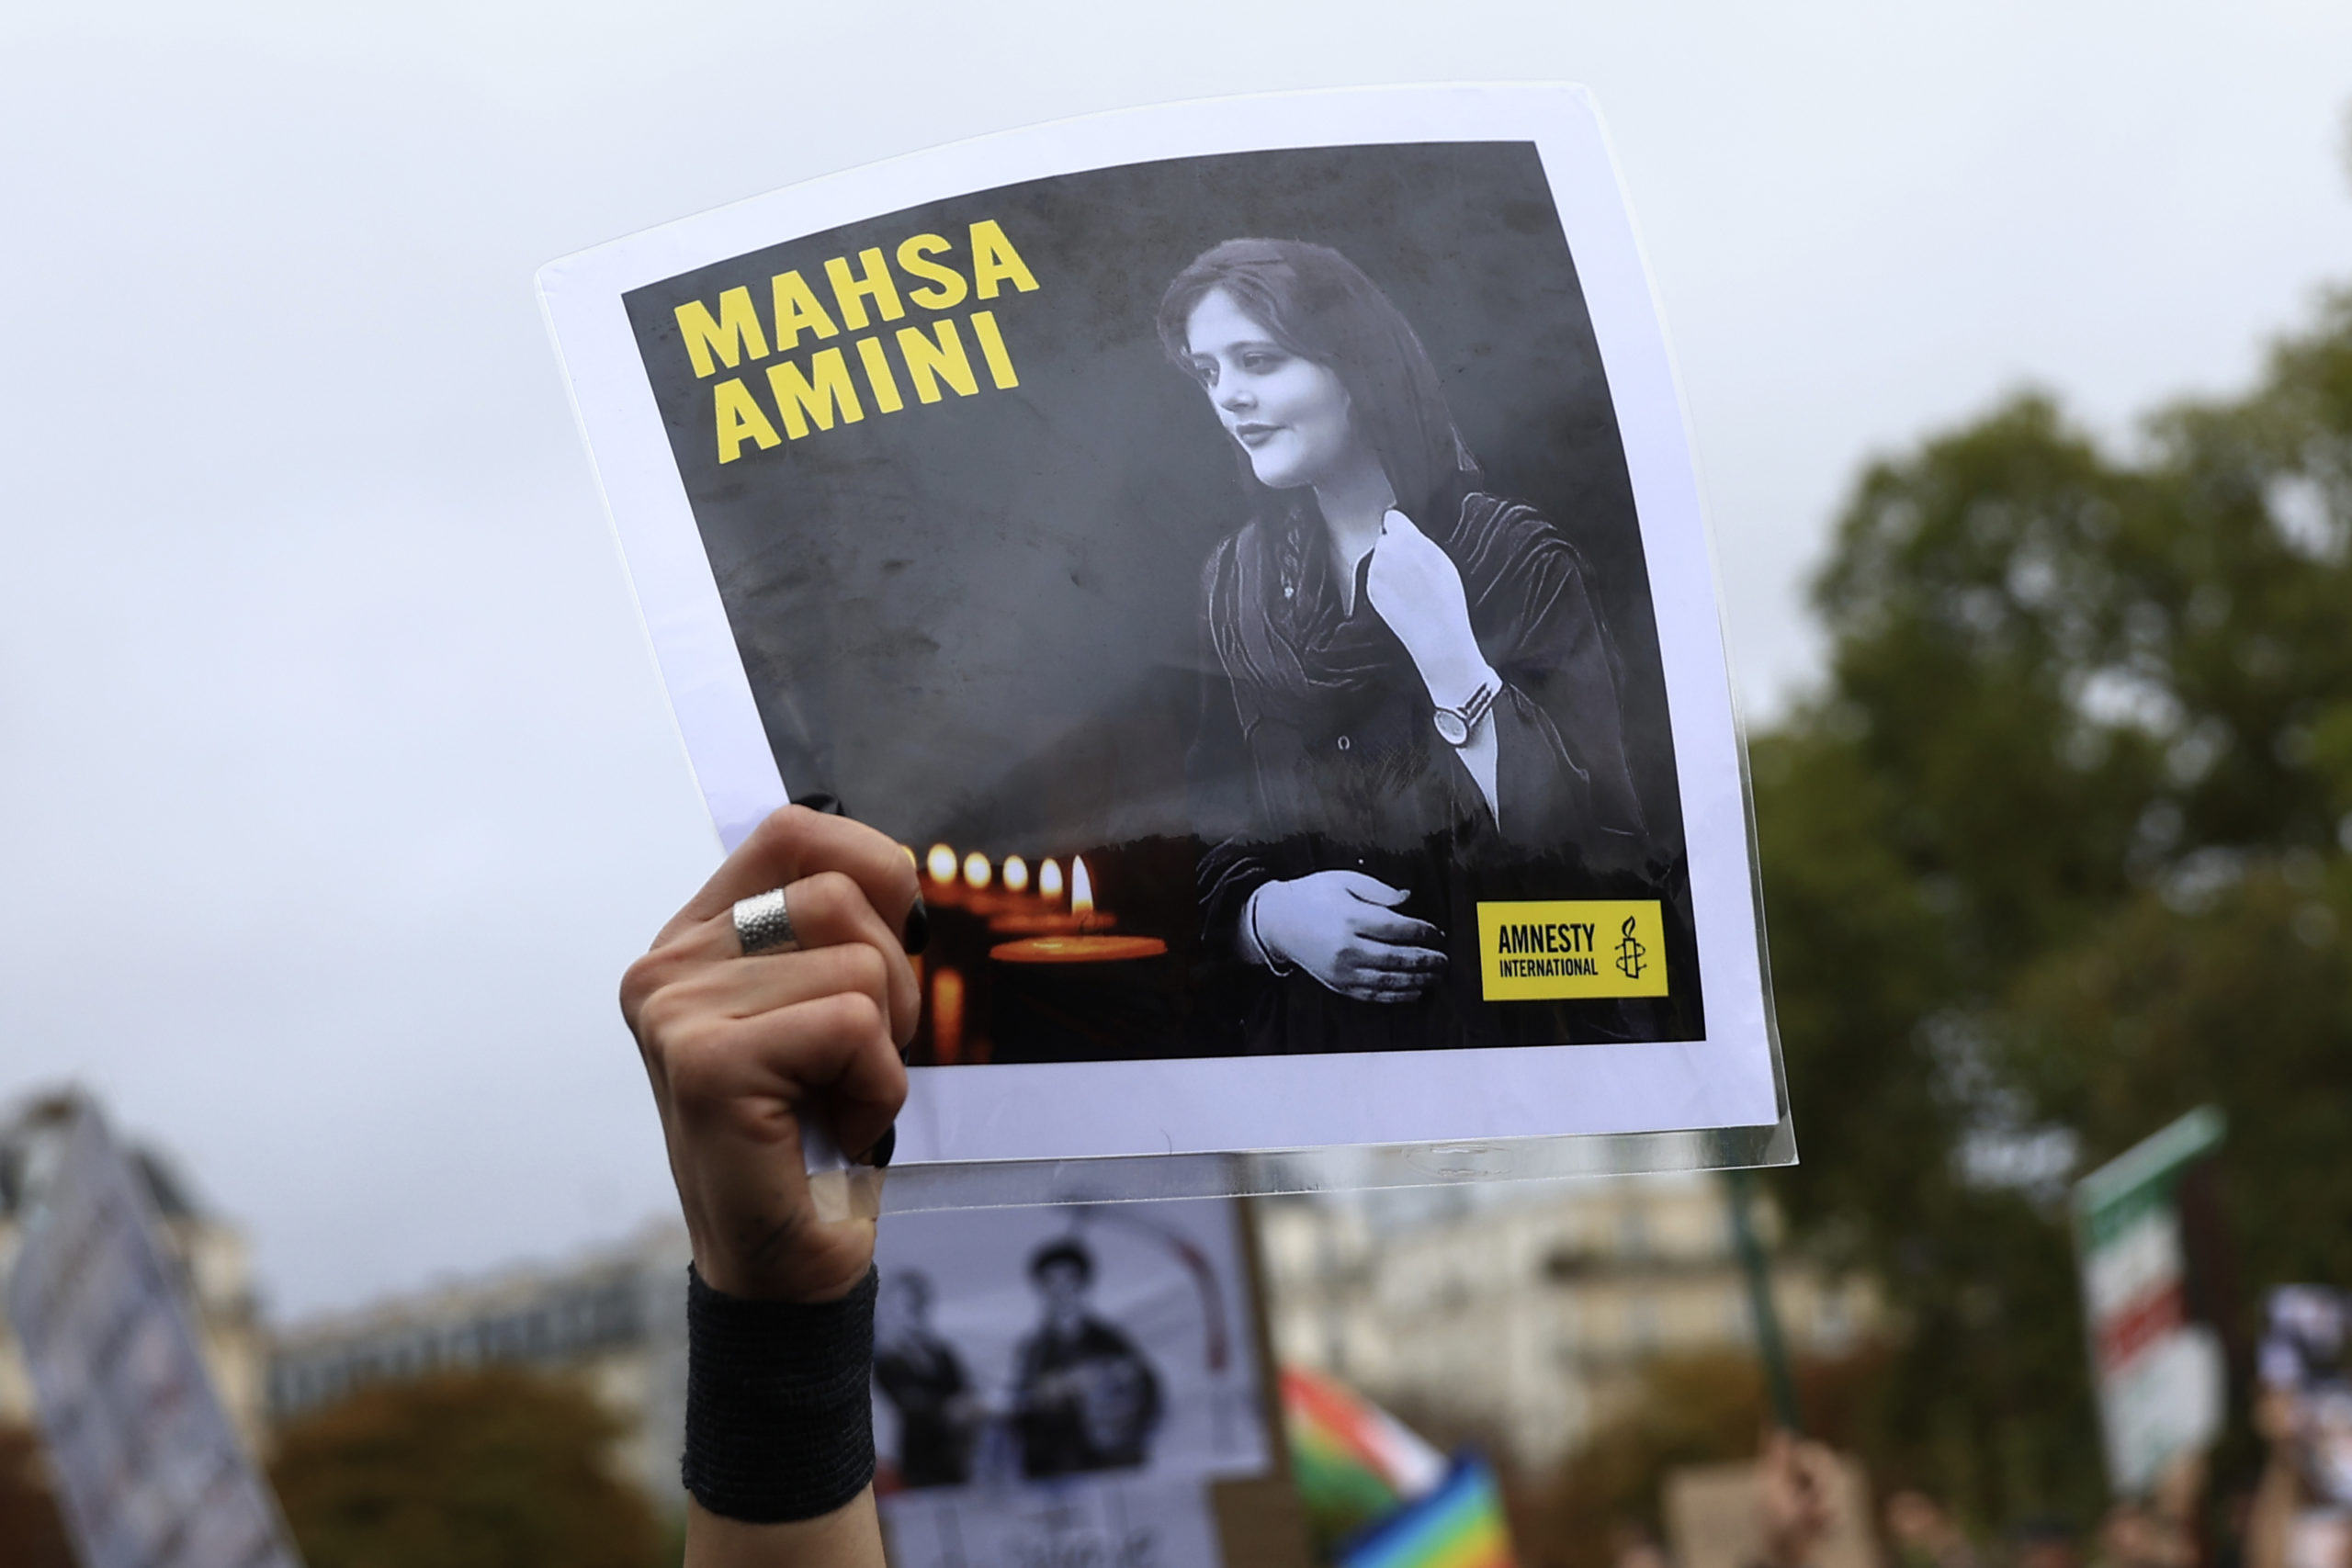 A protester shows a portrait of Mahsa Amini during a demonstration to support Iranian protesters standing up to their leadership over the death of a young woman in police custody on Sunday in Paris.